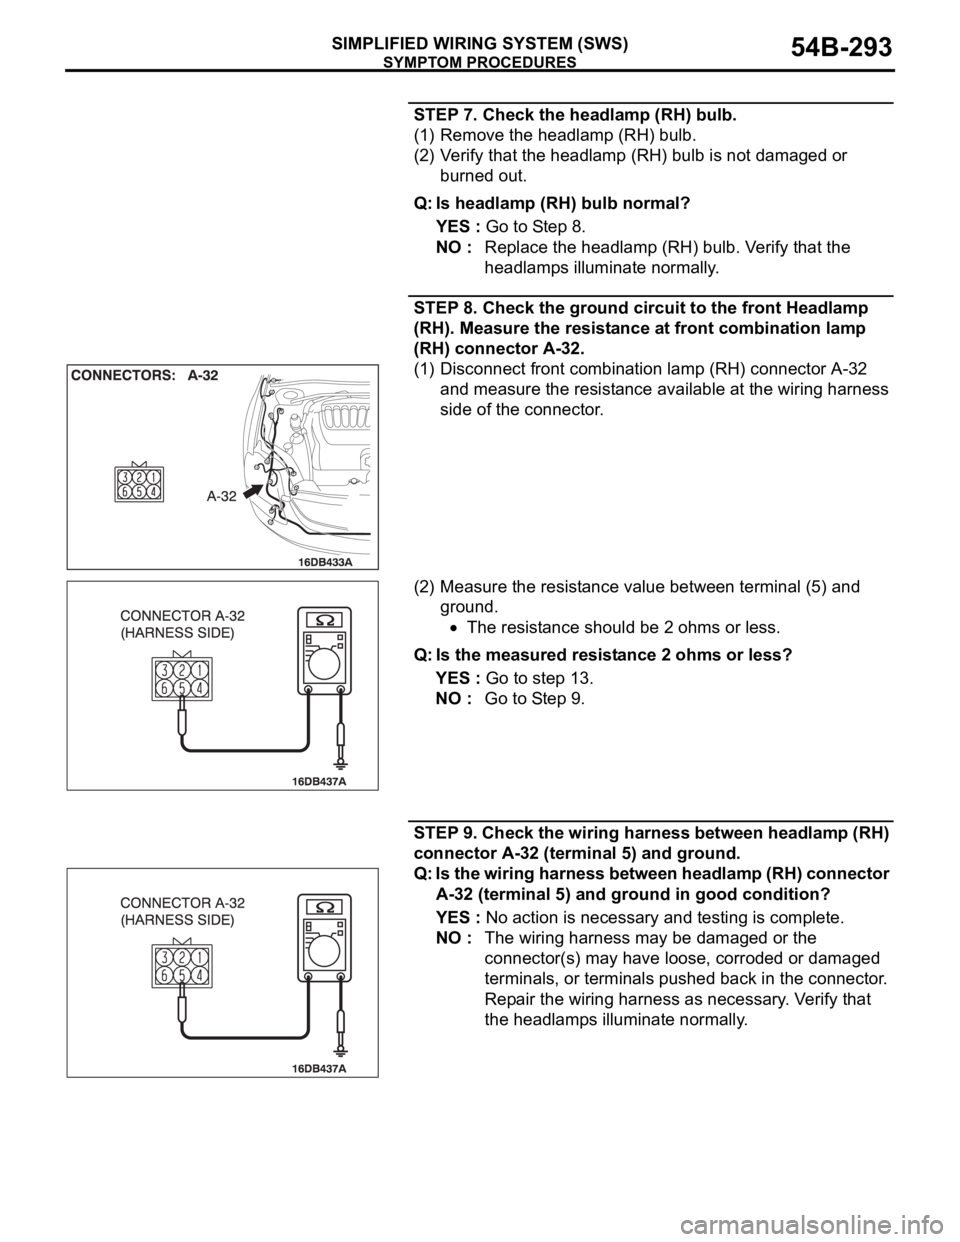 MITSUBISHI 380 2005  Workshop Manual SYMPTOM PROCEDURES
SIMPLIFIED WIRING SYSTEM (SWS)54B-293
STEP 7. Check the headlamp (RH) bulb.
(1) Remove the headlamp (RH) bulb.
(2) Verify that the headlamp (RH) bulb is not damaged or 
burned out.
